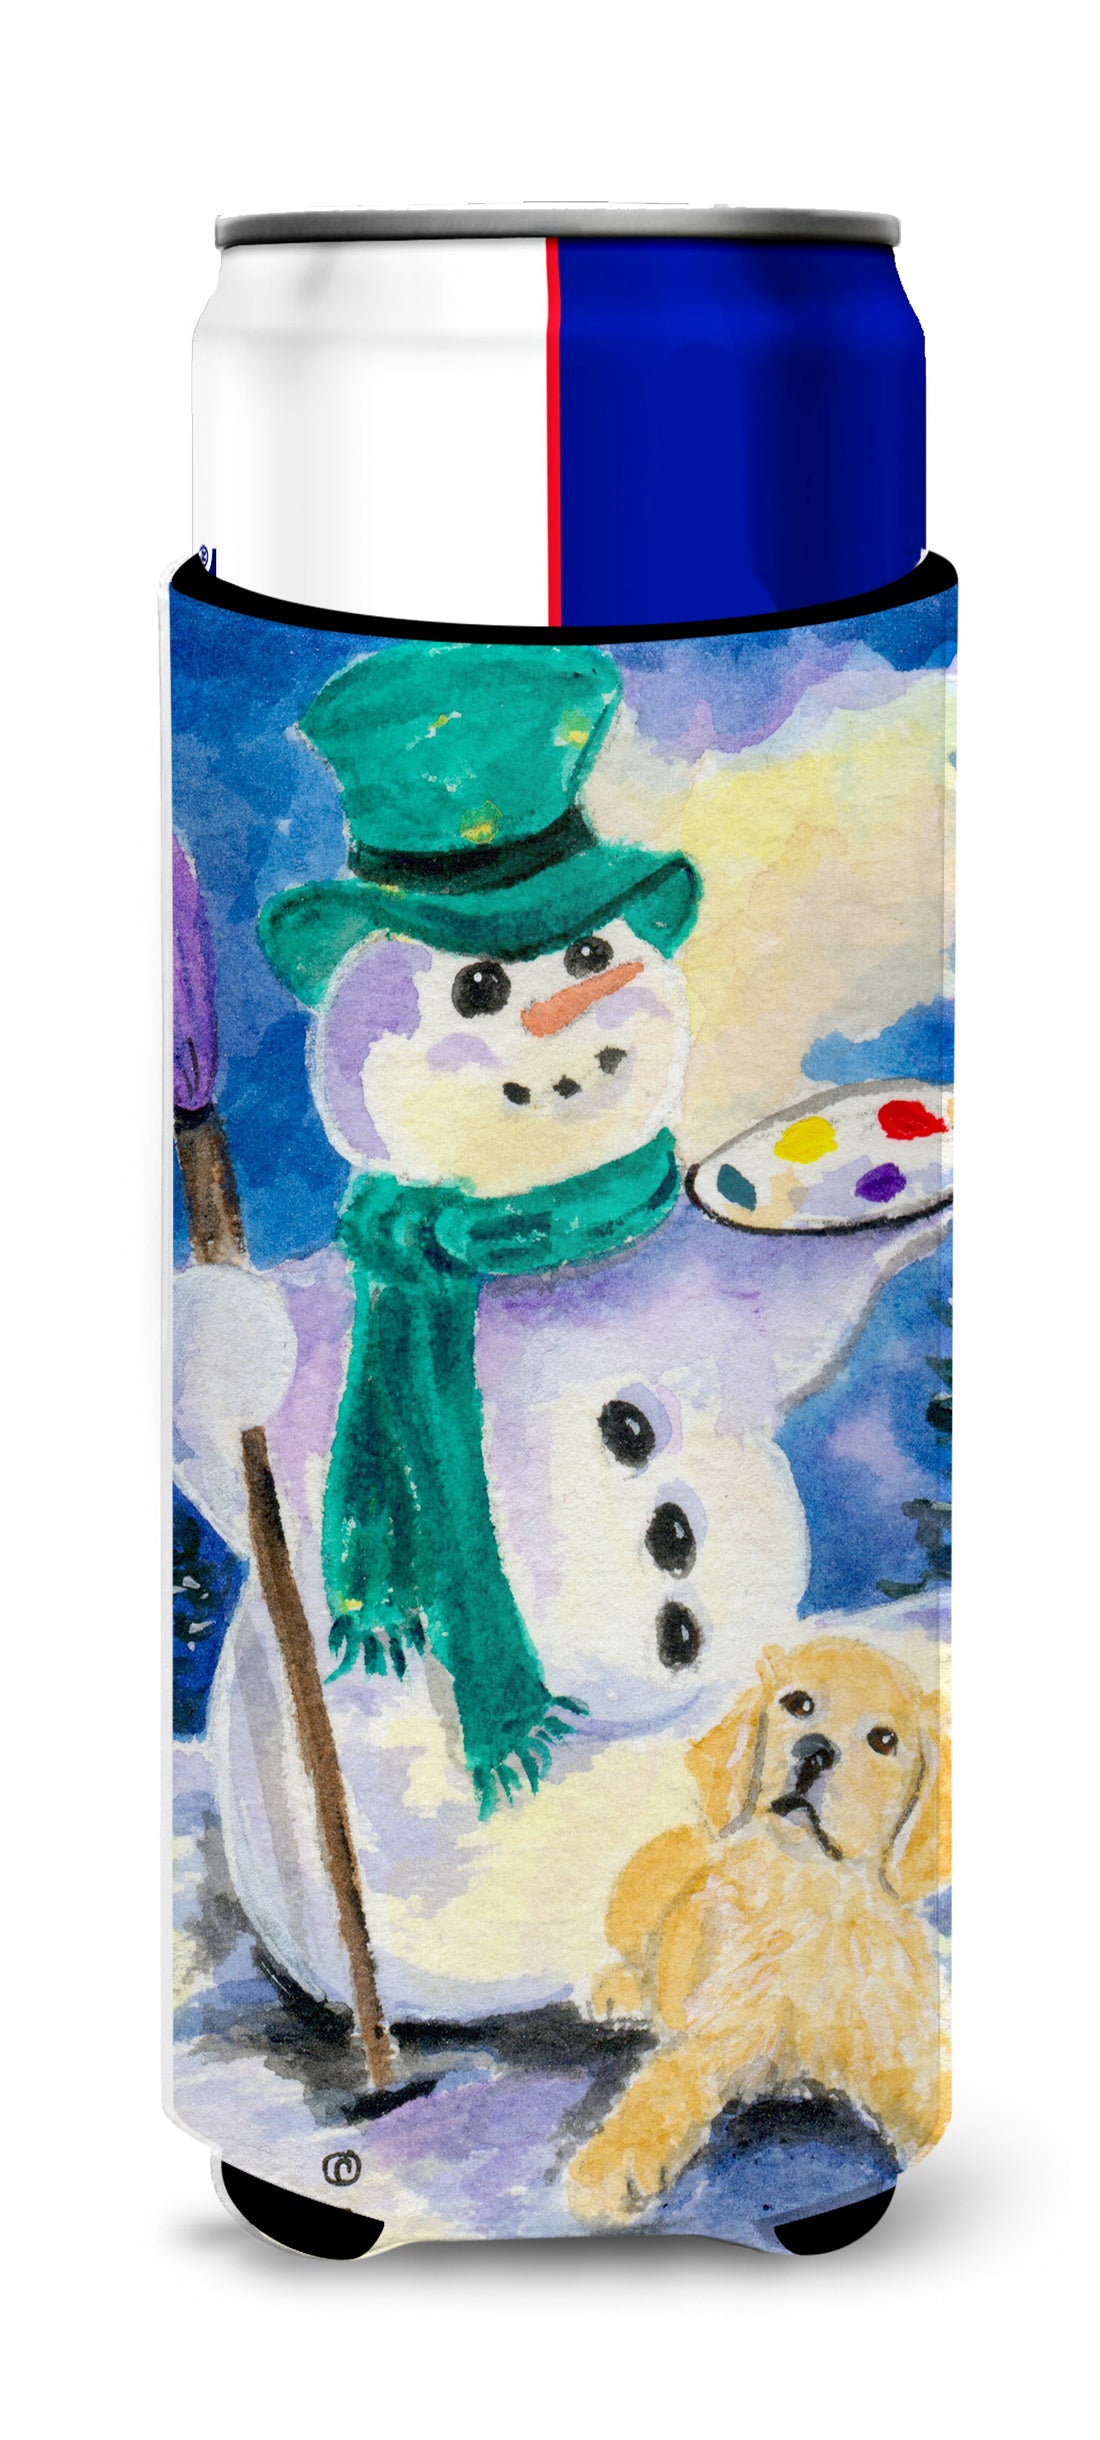 Snowman with Golden Retriever Ultra Beverage Insulators for slim cans SS8994MUK